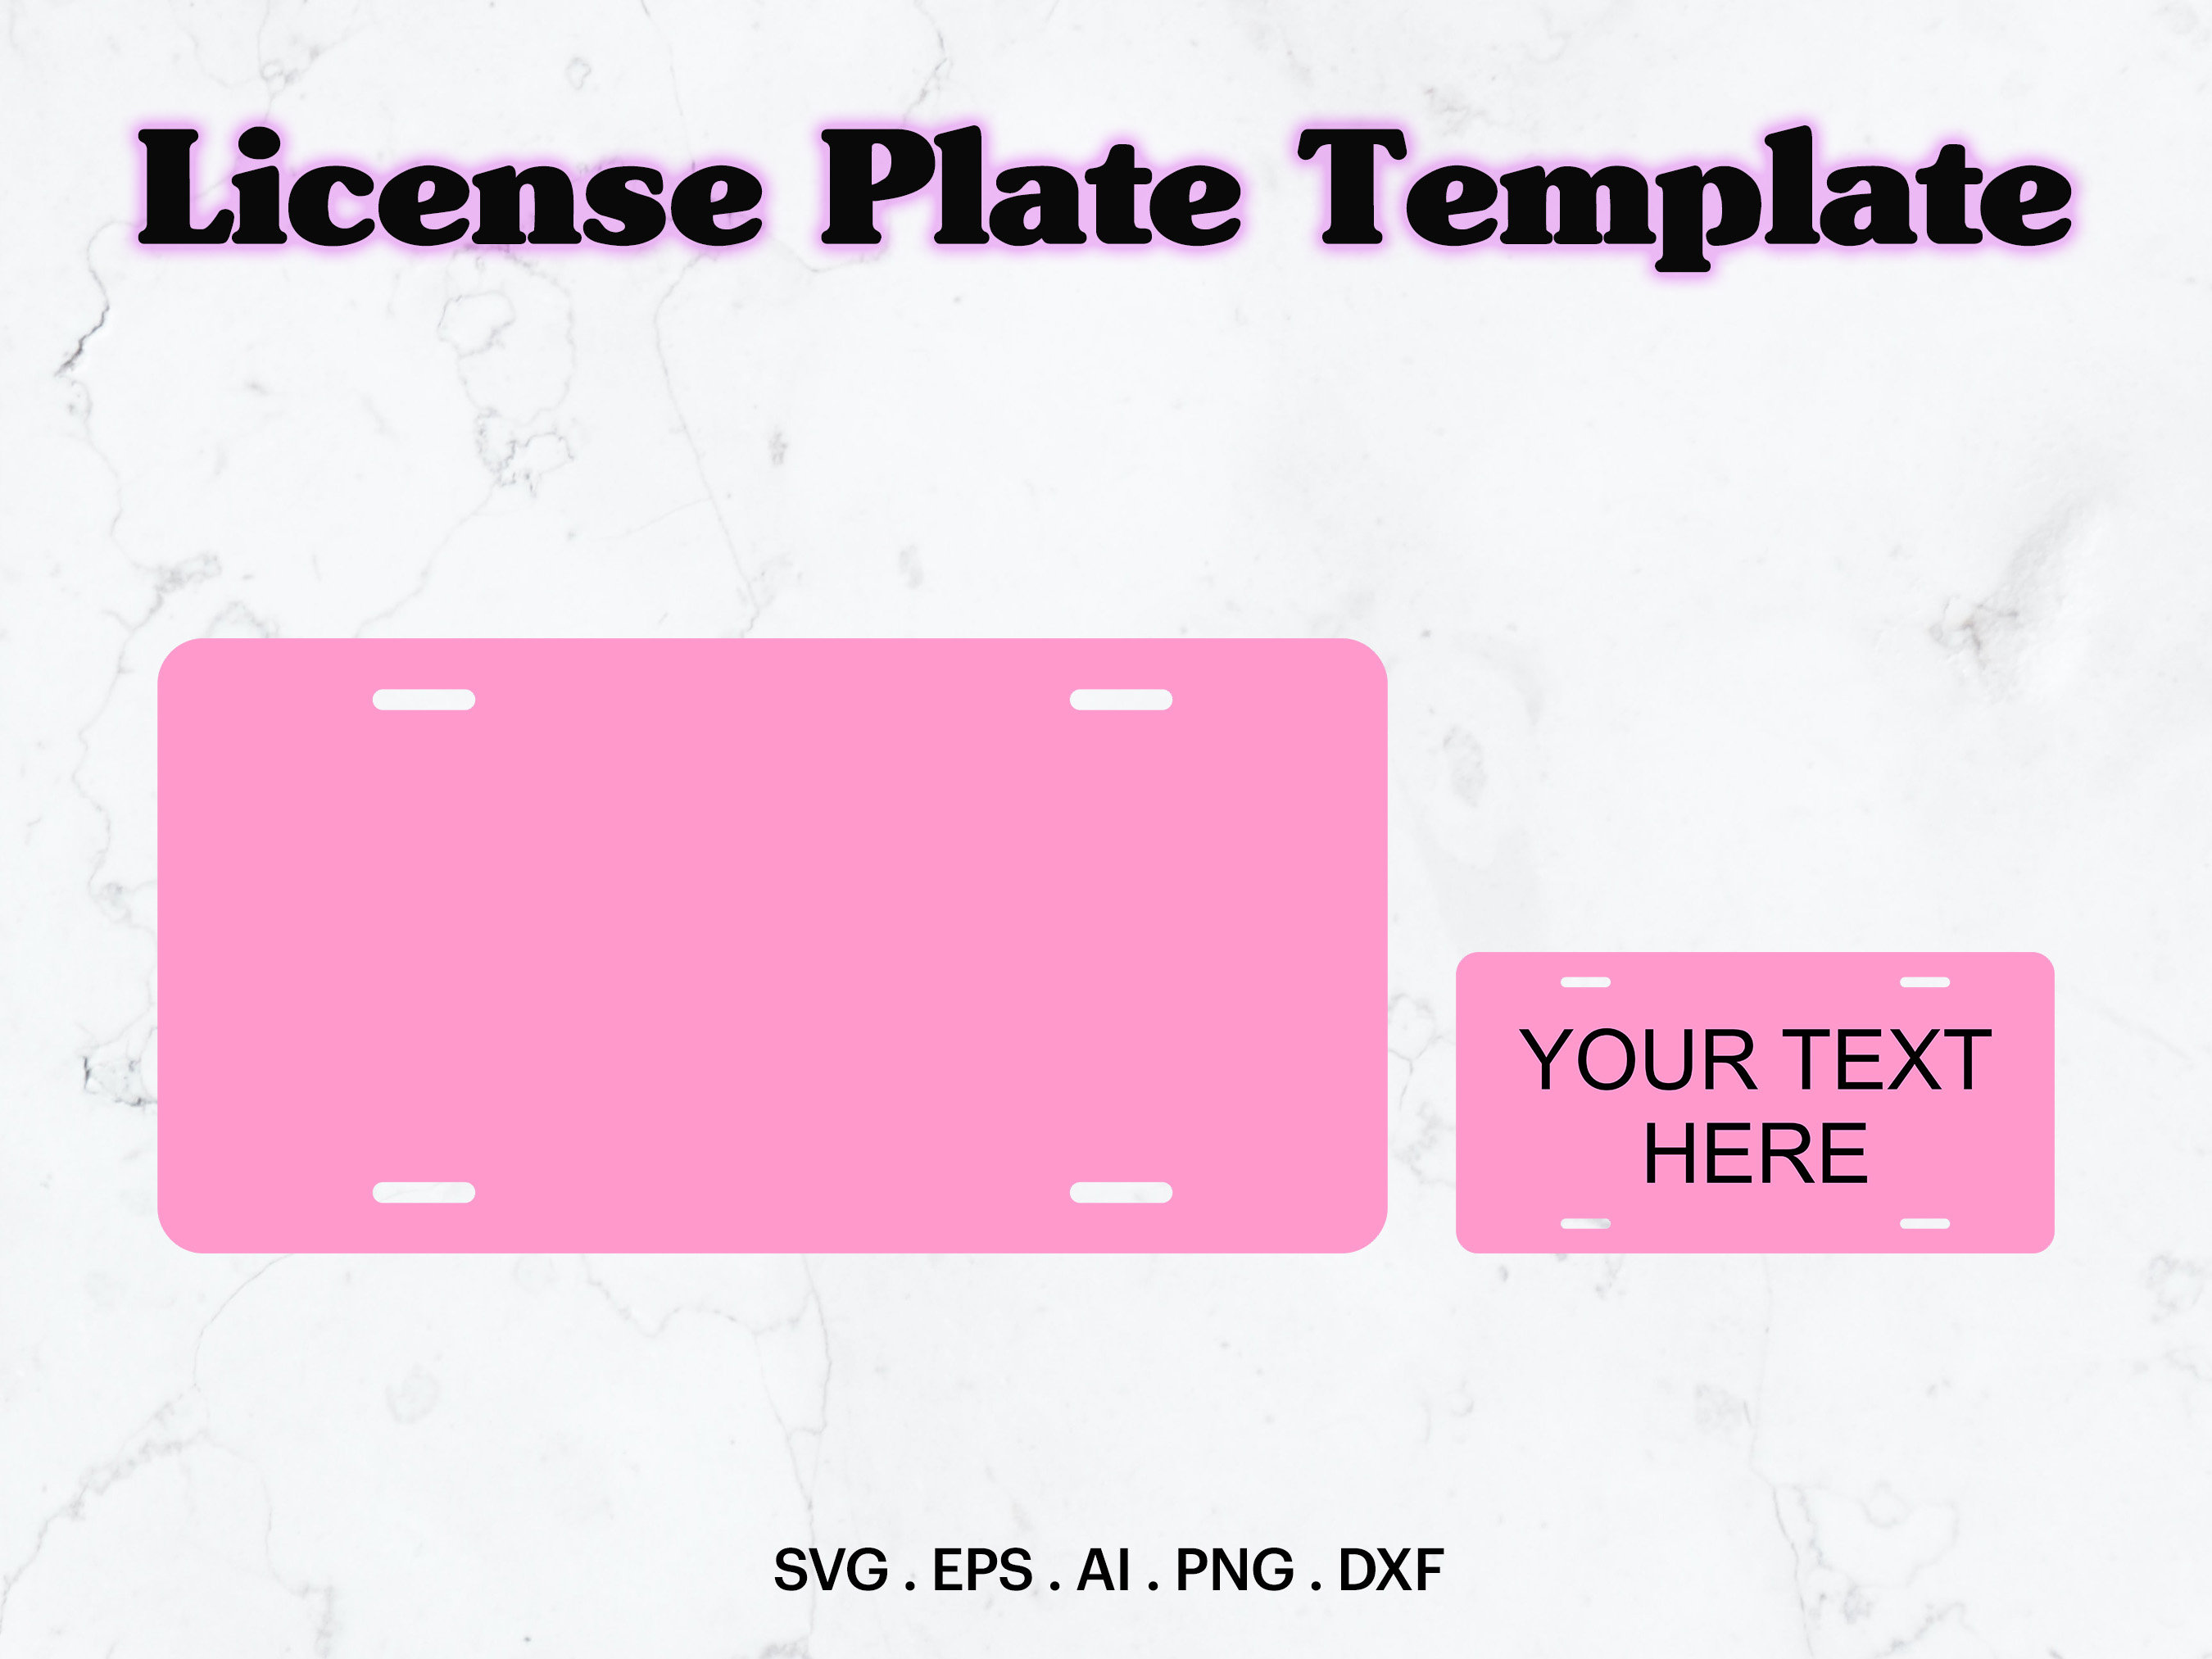 license-plate-blank-template-svg-legal-paper-size-license-plate